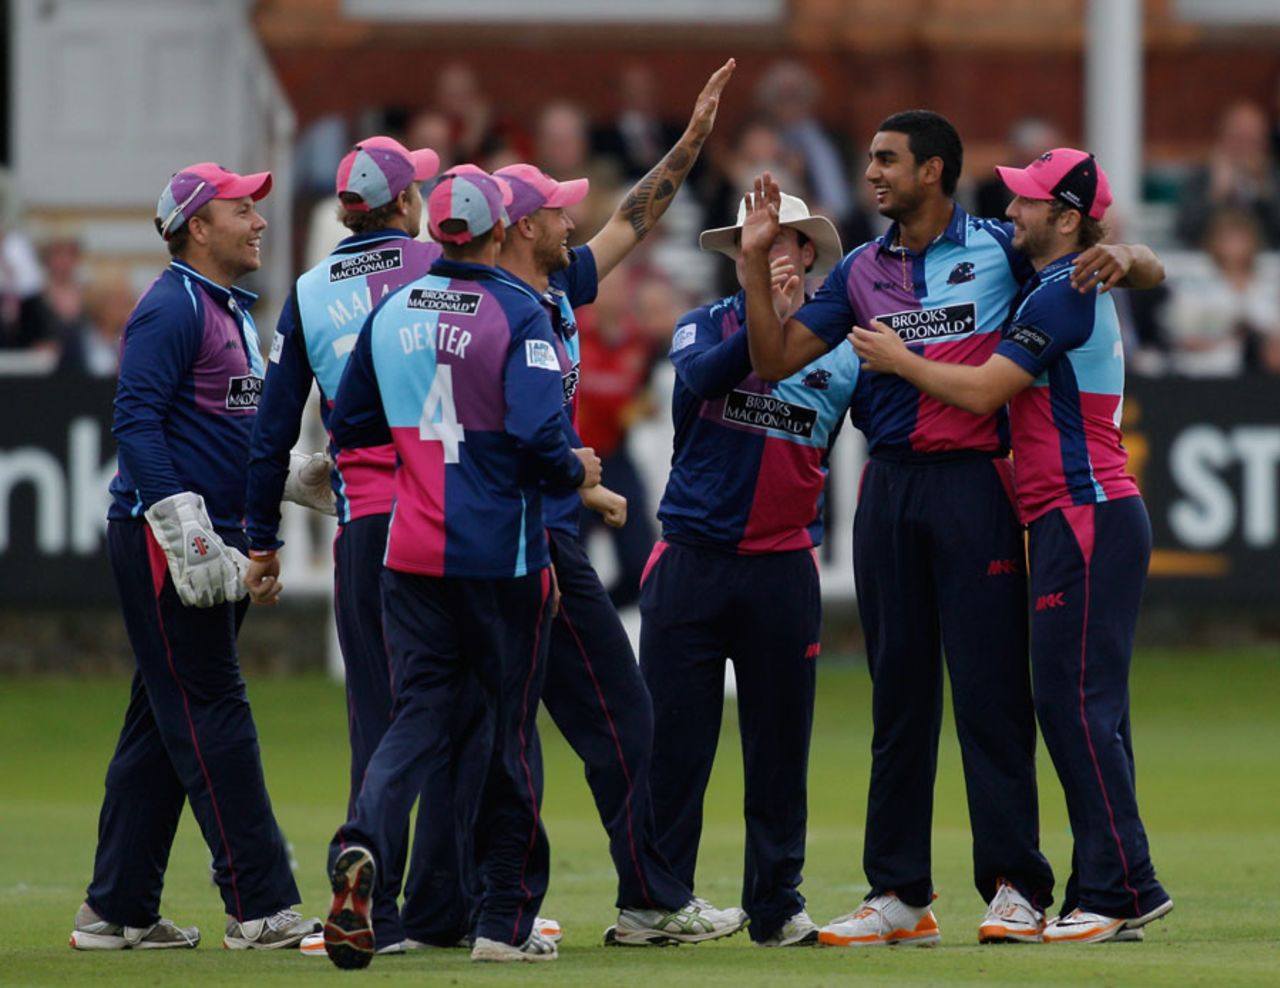 Gurjit Sandhu is congratulated by his team-mates, Middlesex v Essex, CB40 Group A, Lord's, August 27, 2012